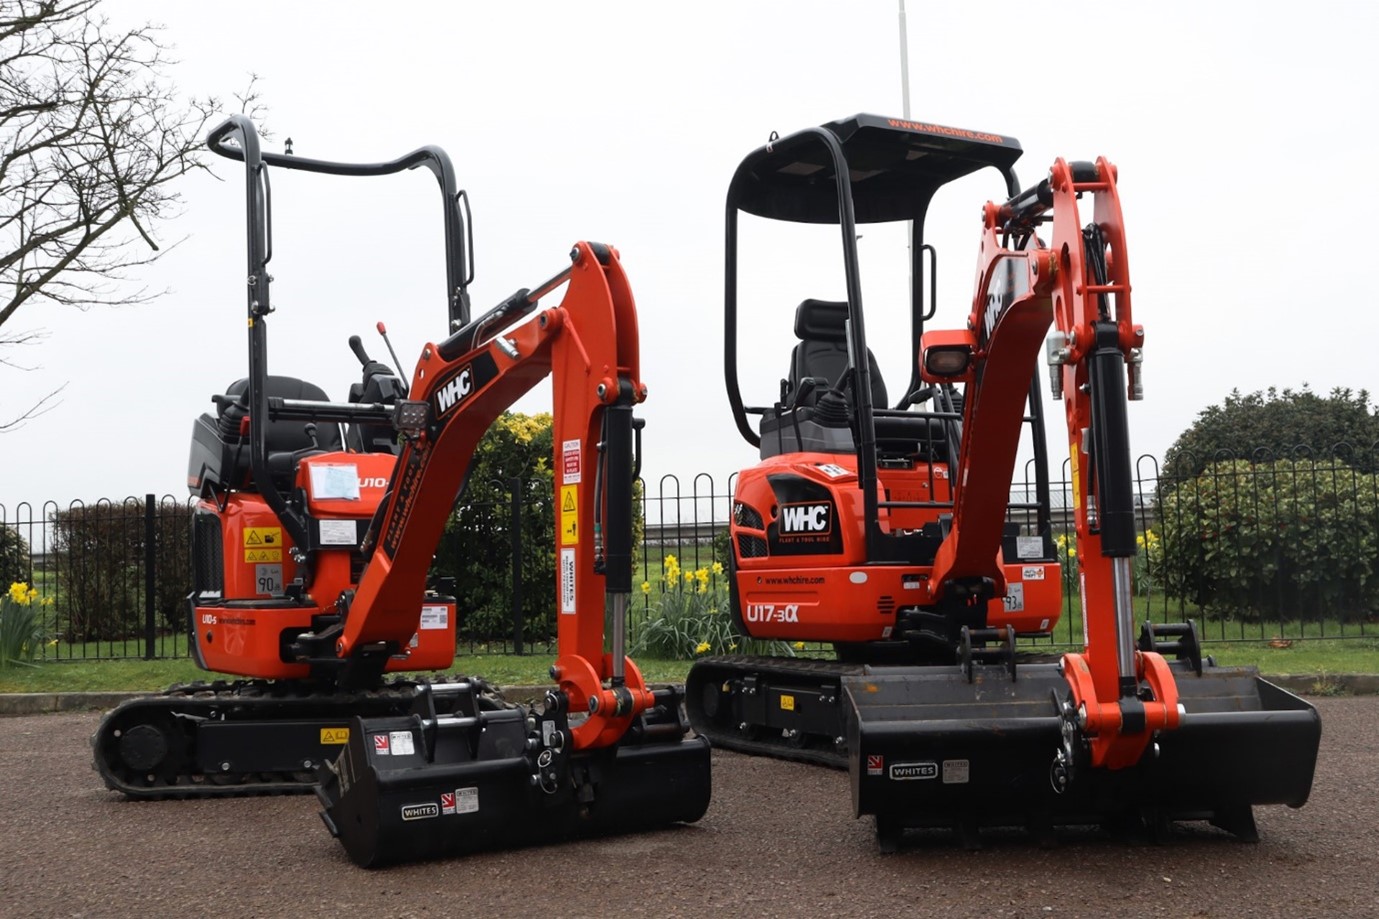 Micro and mini digger updates whc hire